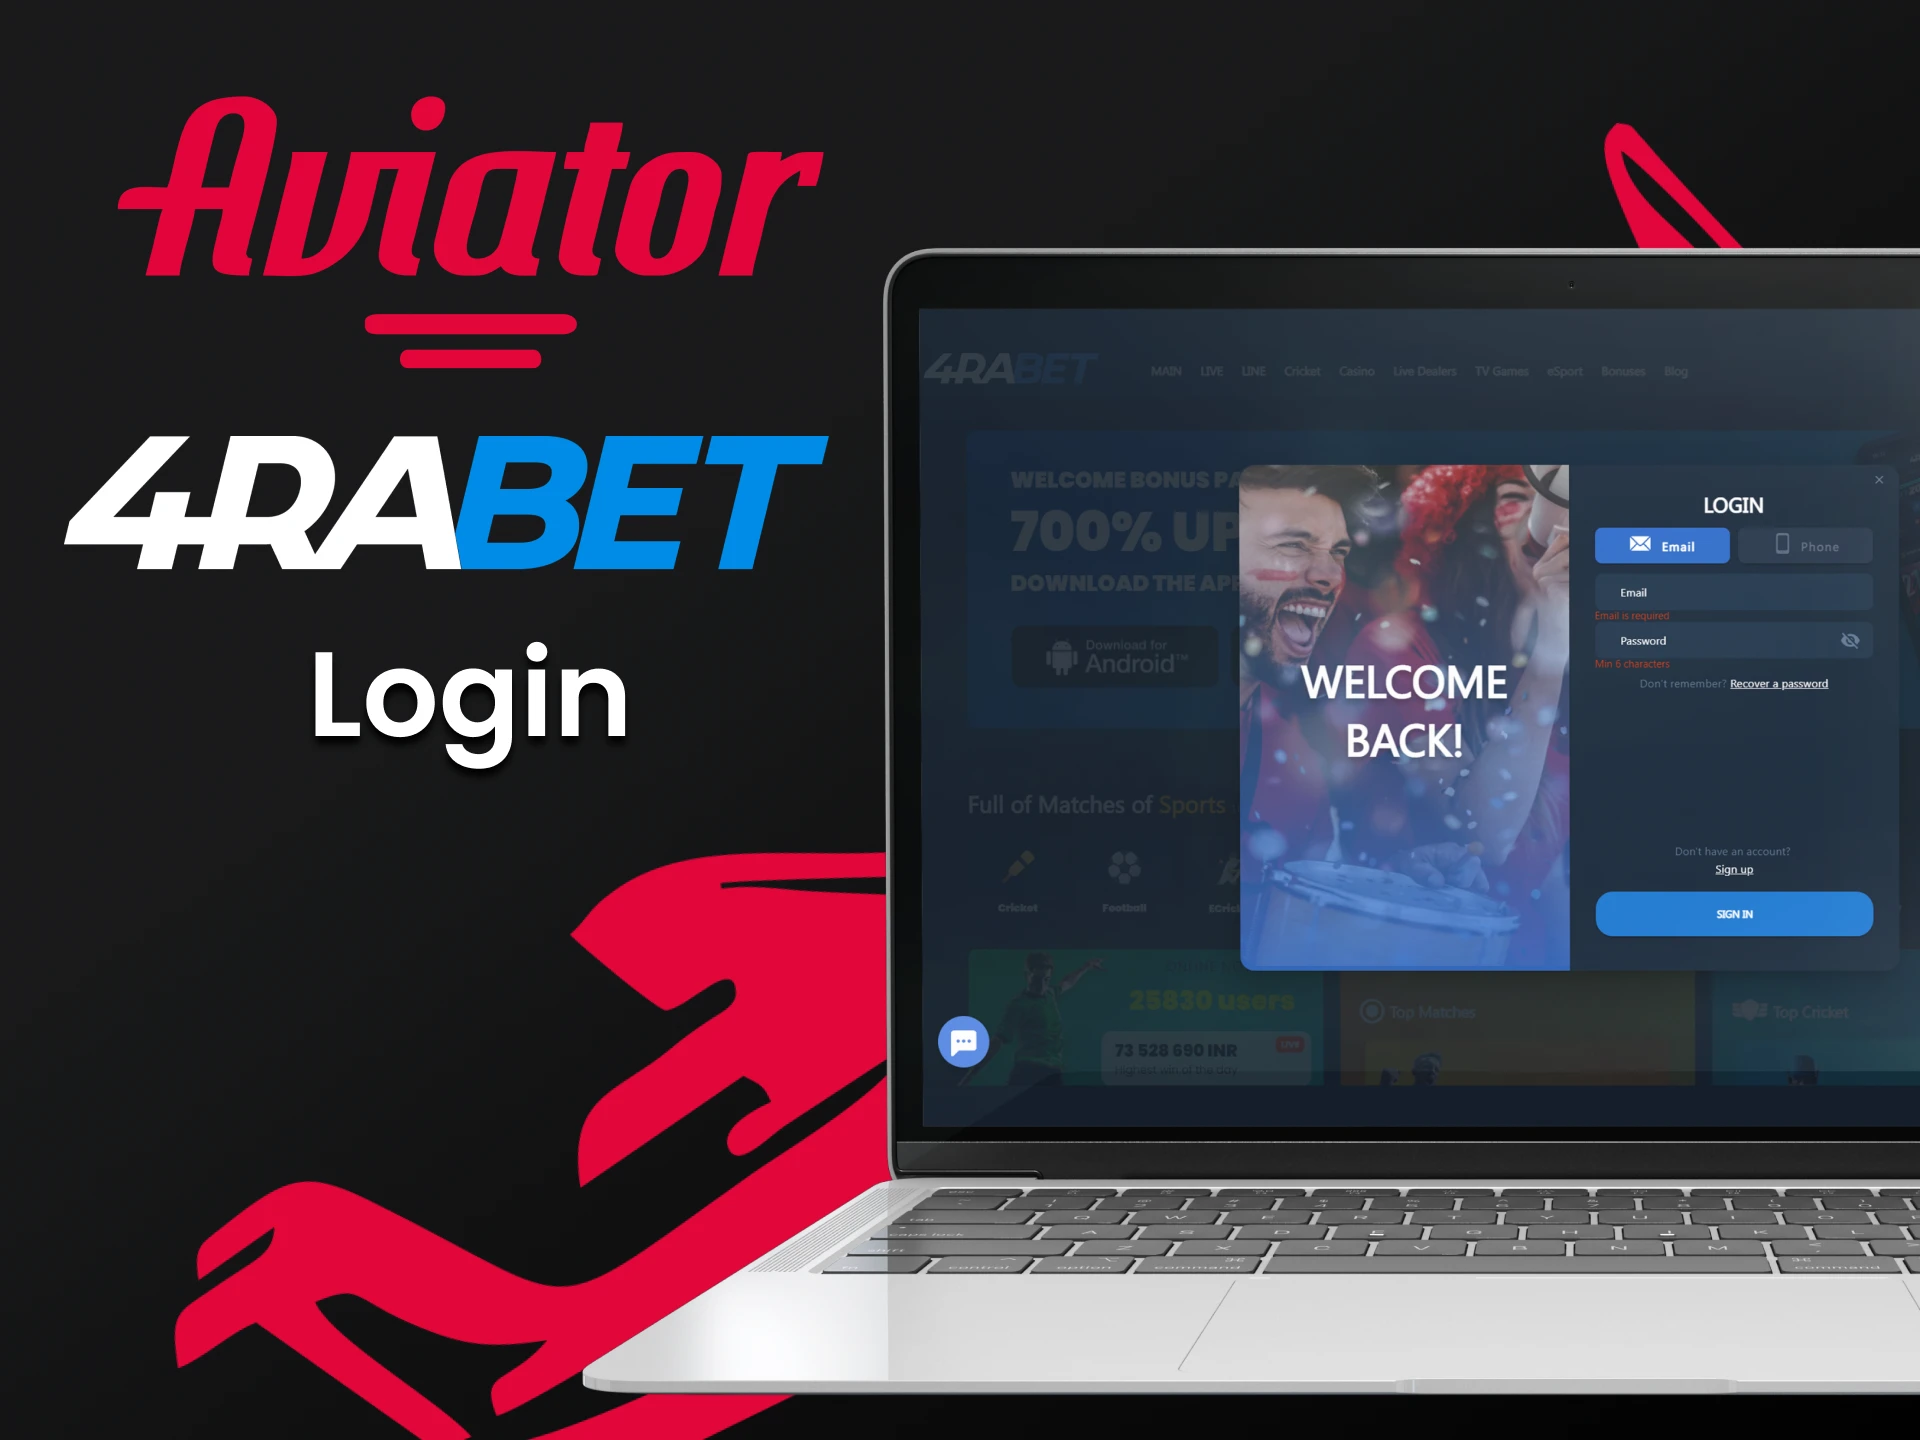 Login to your personal account to start playing Aviator on 4rabet.